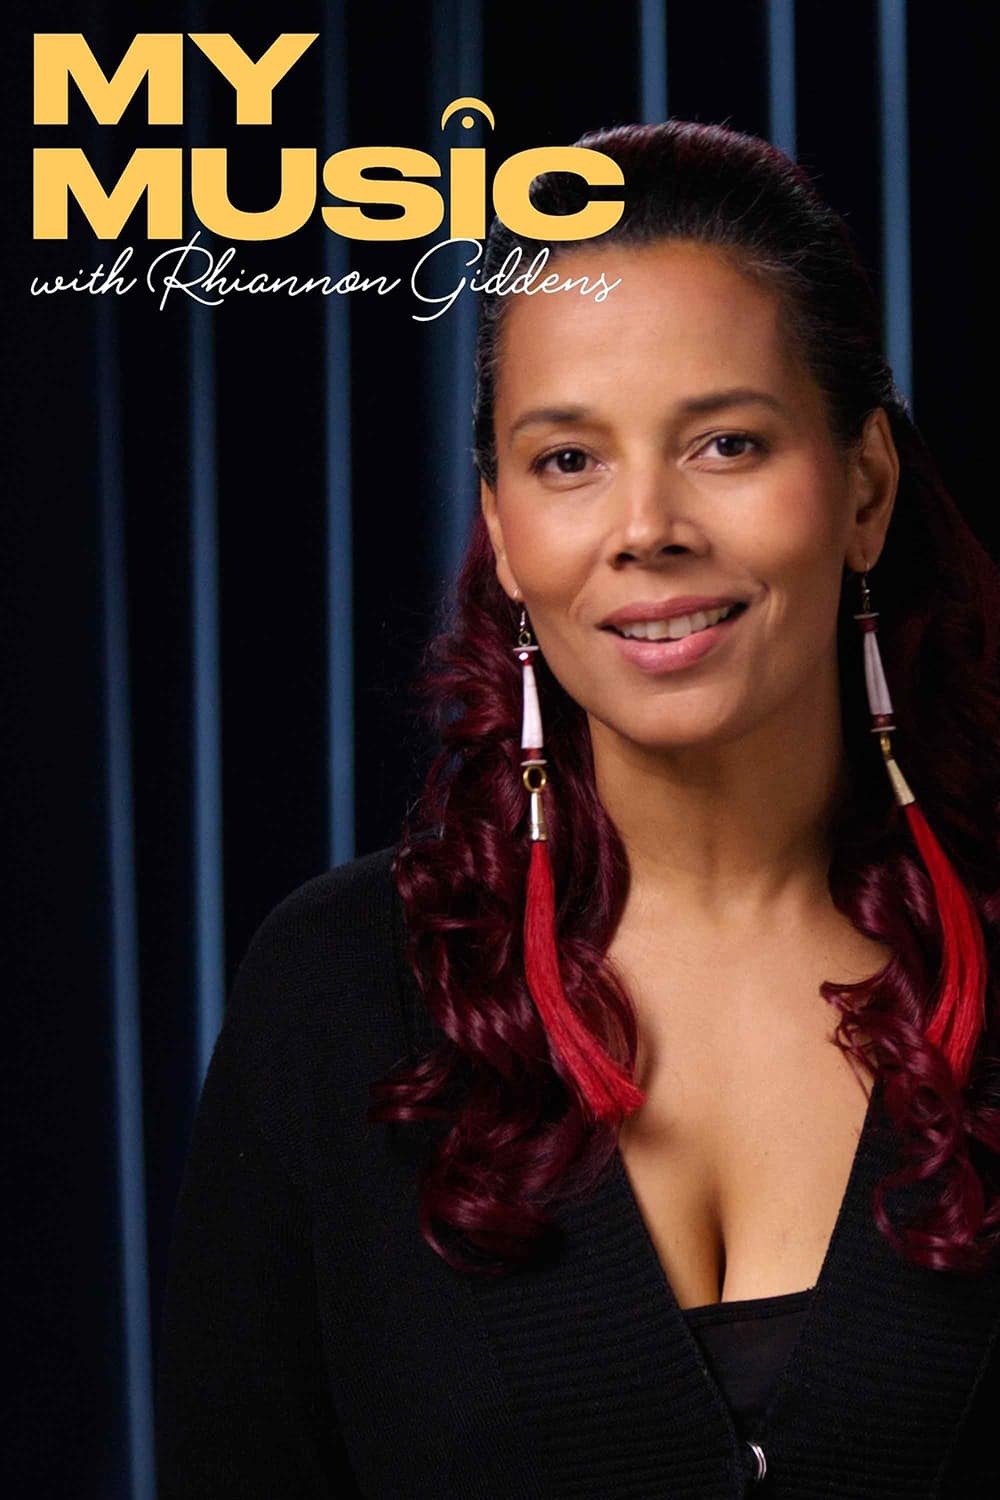 My Music with Rhiannon Giddens poster